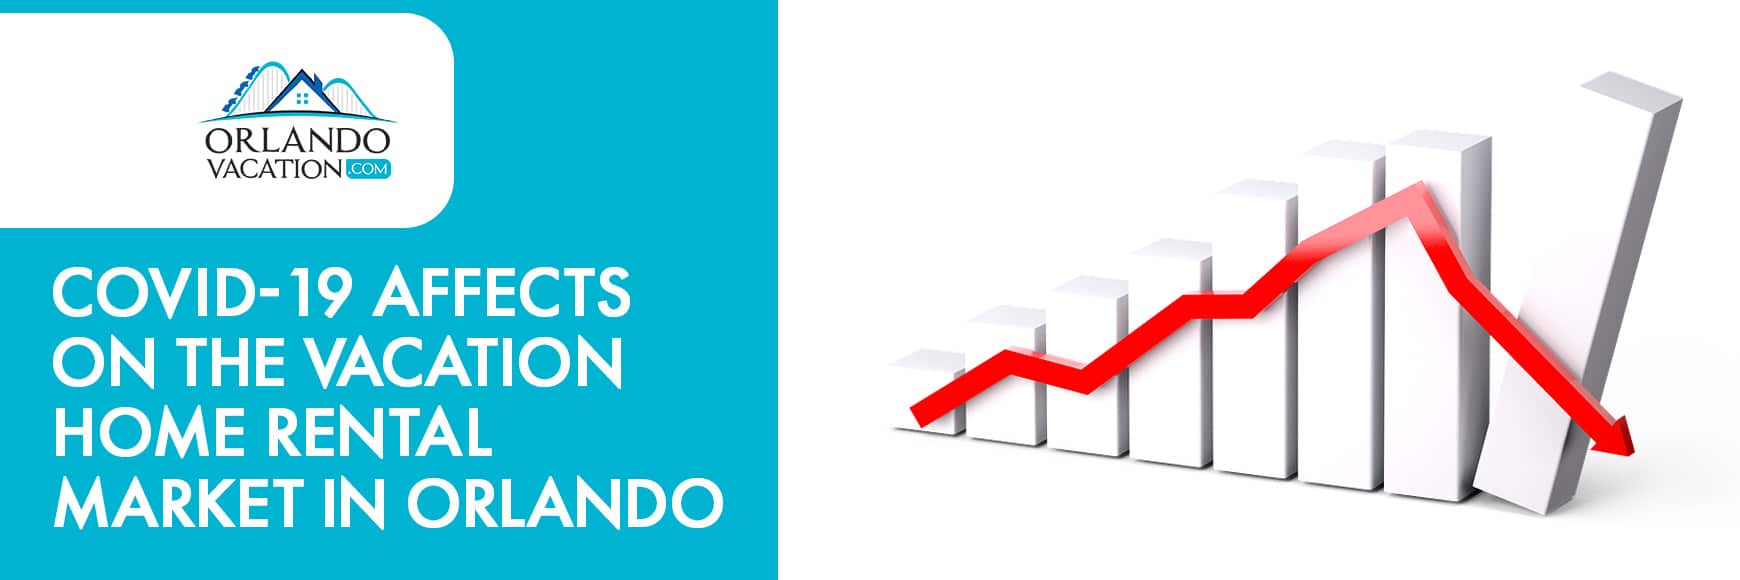 COVID-19 Affects on the Vacation Home Rental Market in Orlando